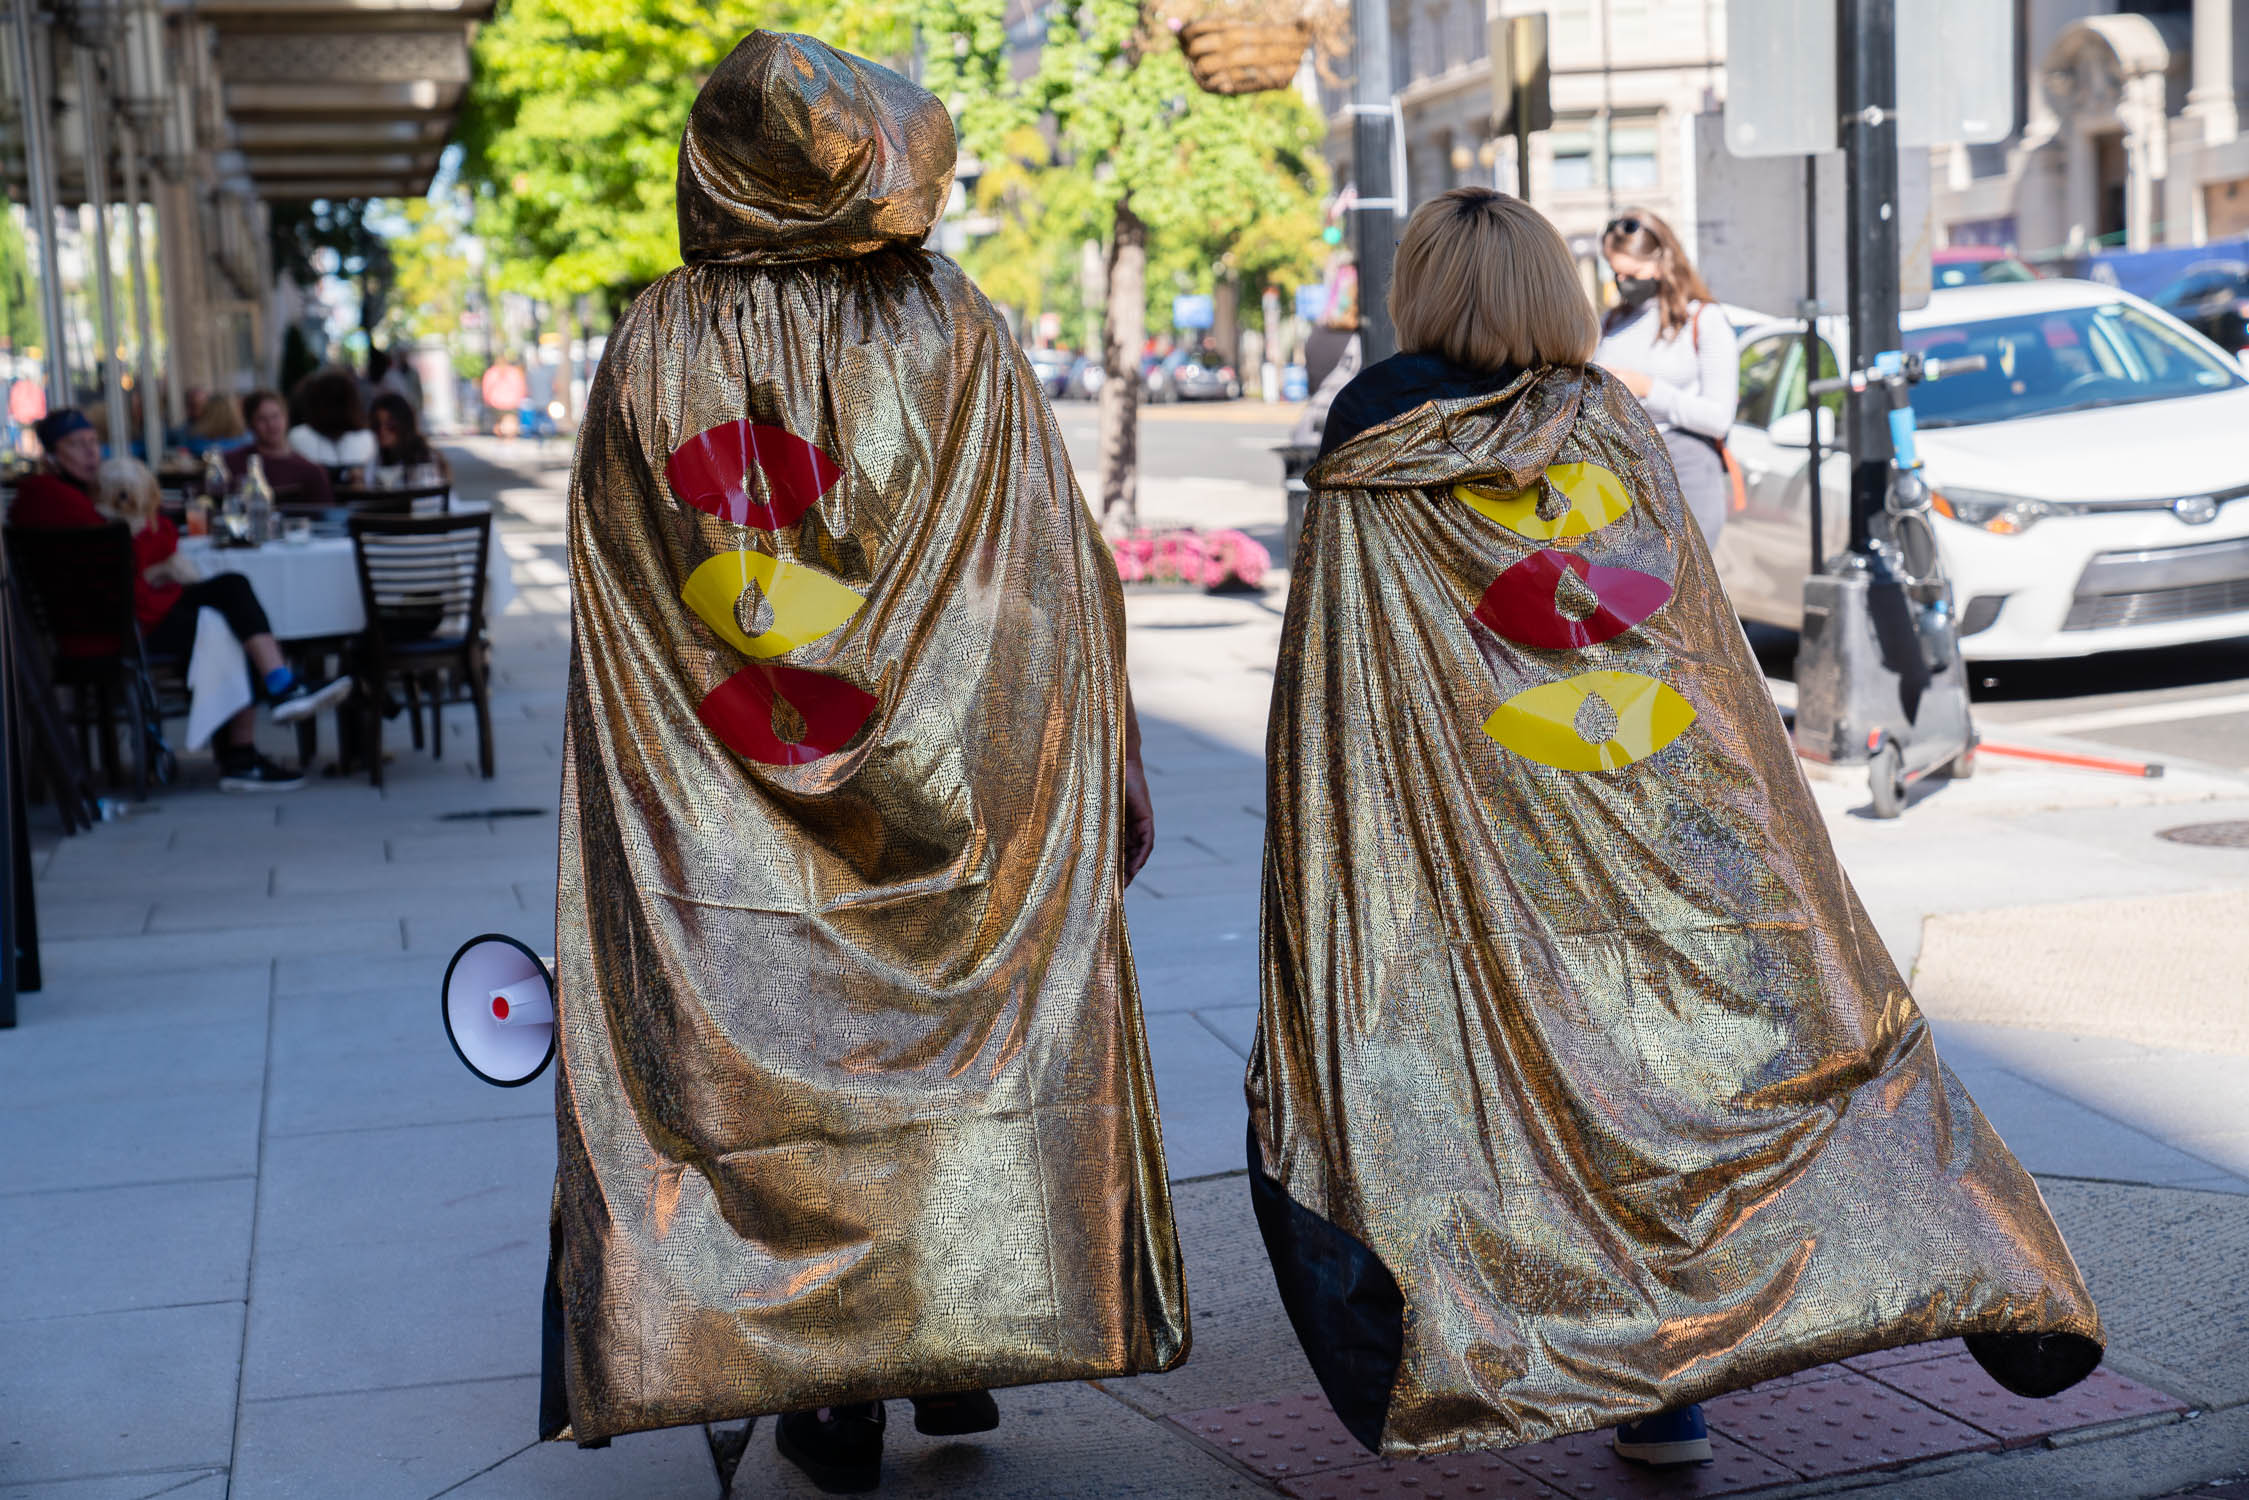 Photograph of two people wearing gold capes